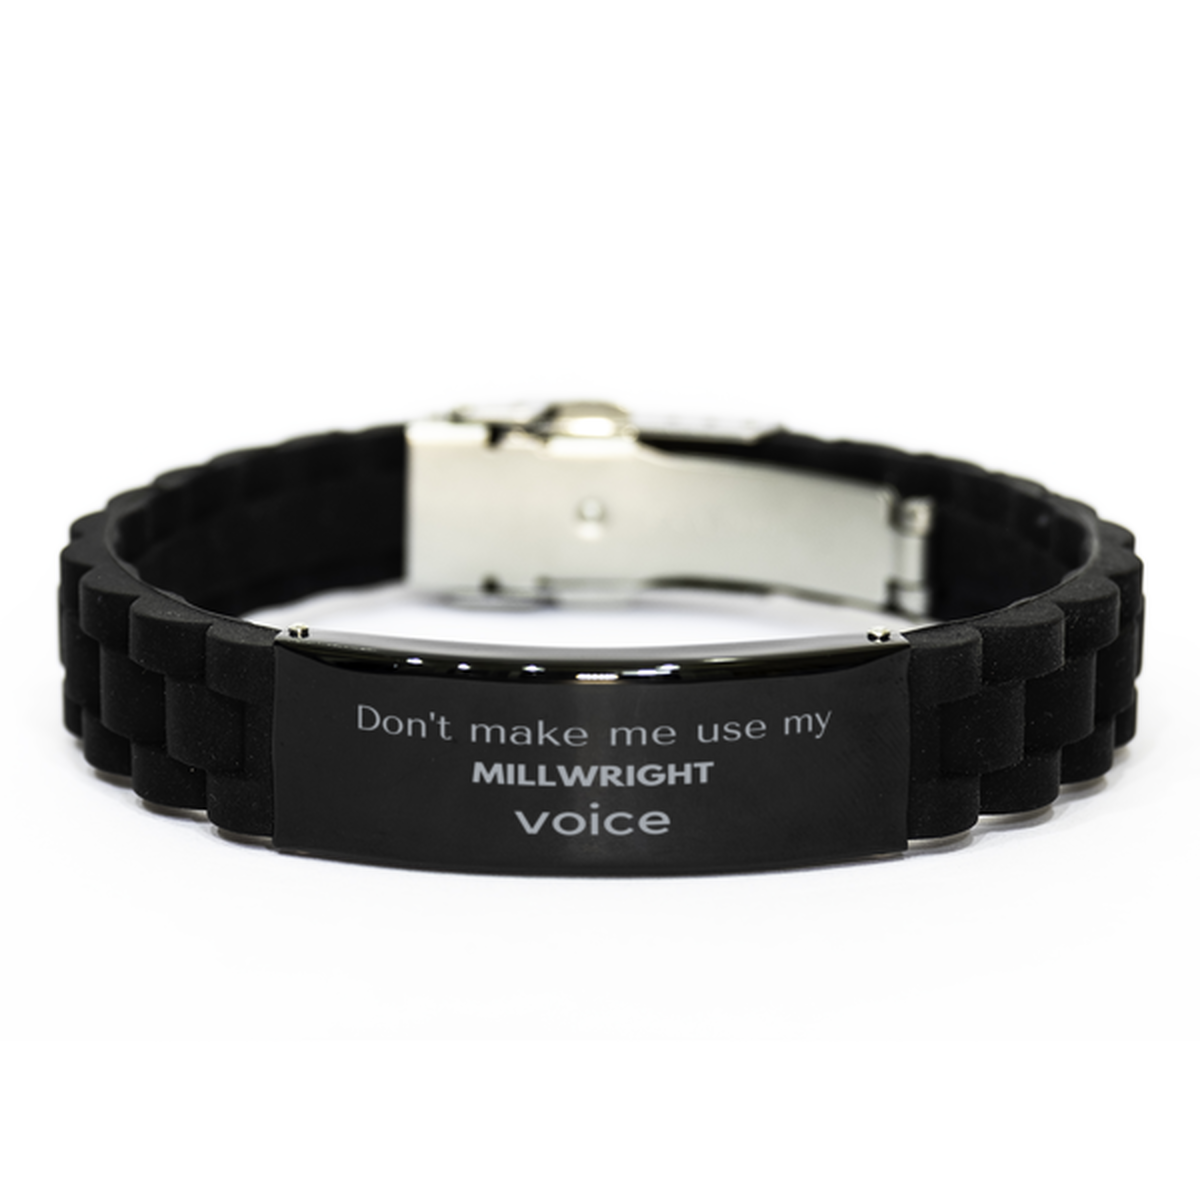 Don't make me use my Millwright voice, Sarcasm Millwright Gifts, Christmas Millwright Black Glidelock Clasp Bracelet Birthday Unique Gifts For Millwright Coworkers, Men, Women, Colleague, Friends